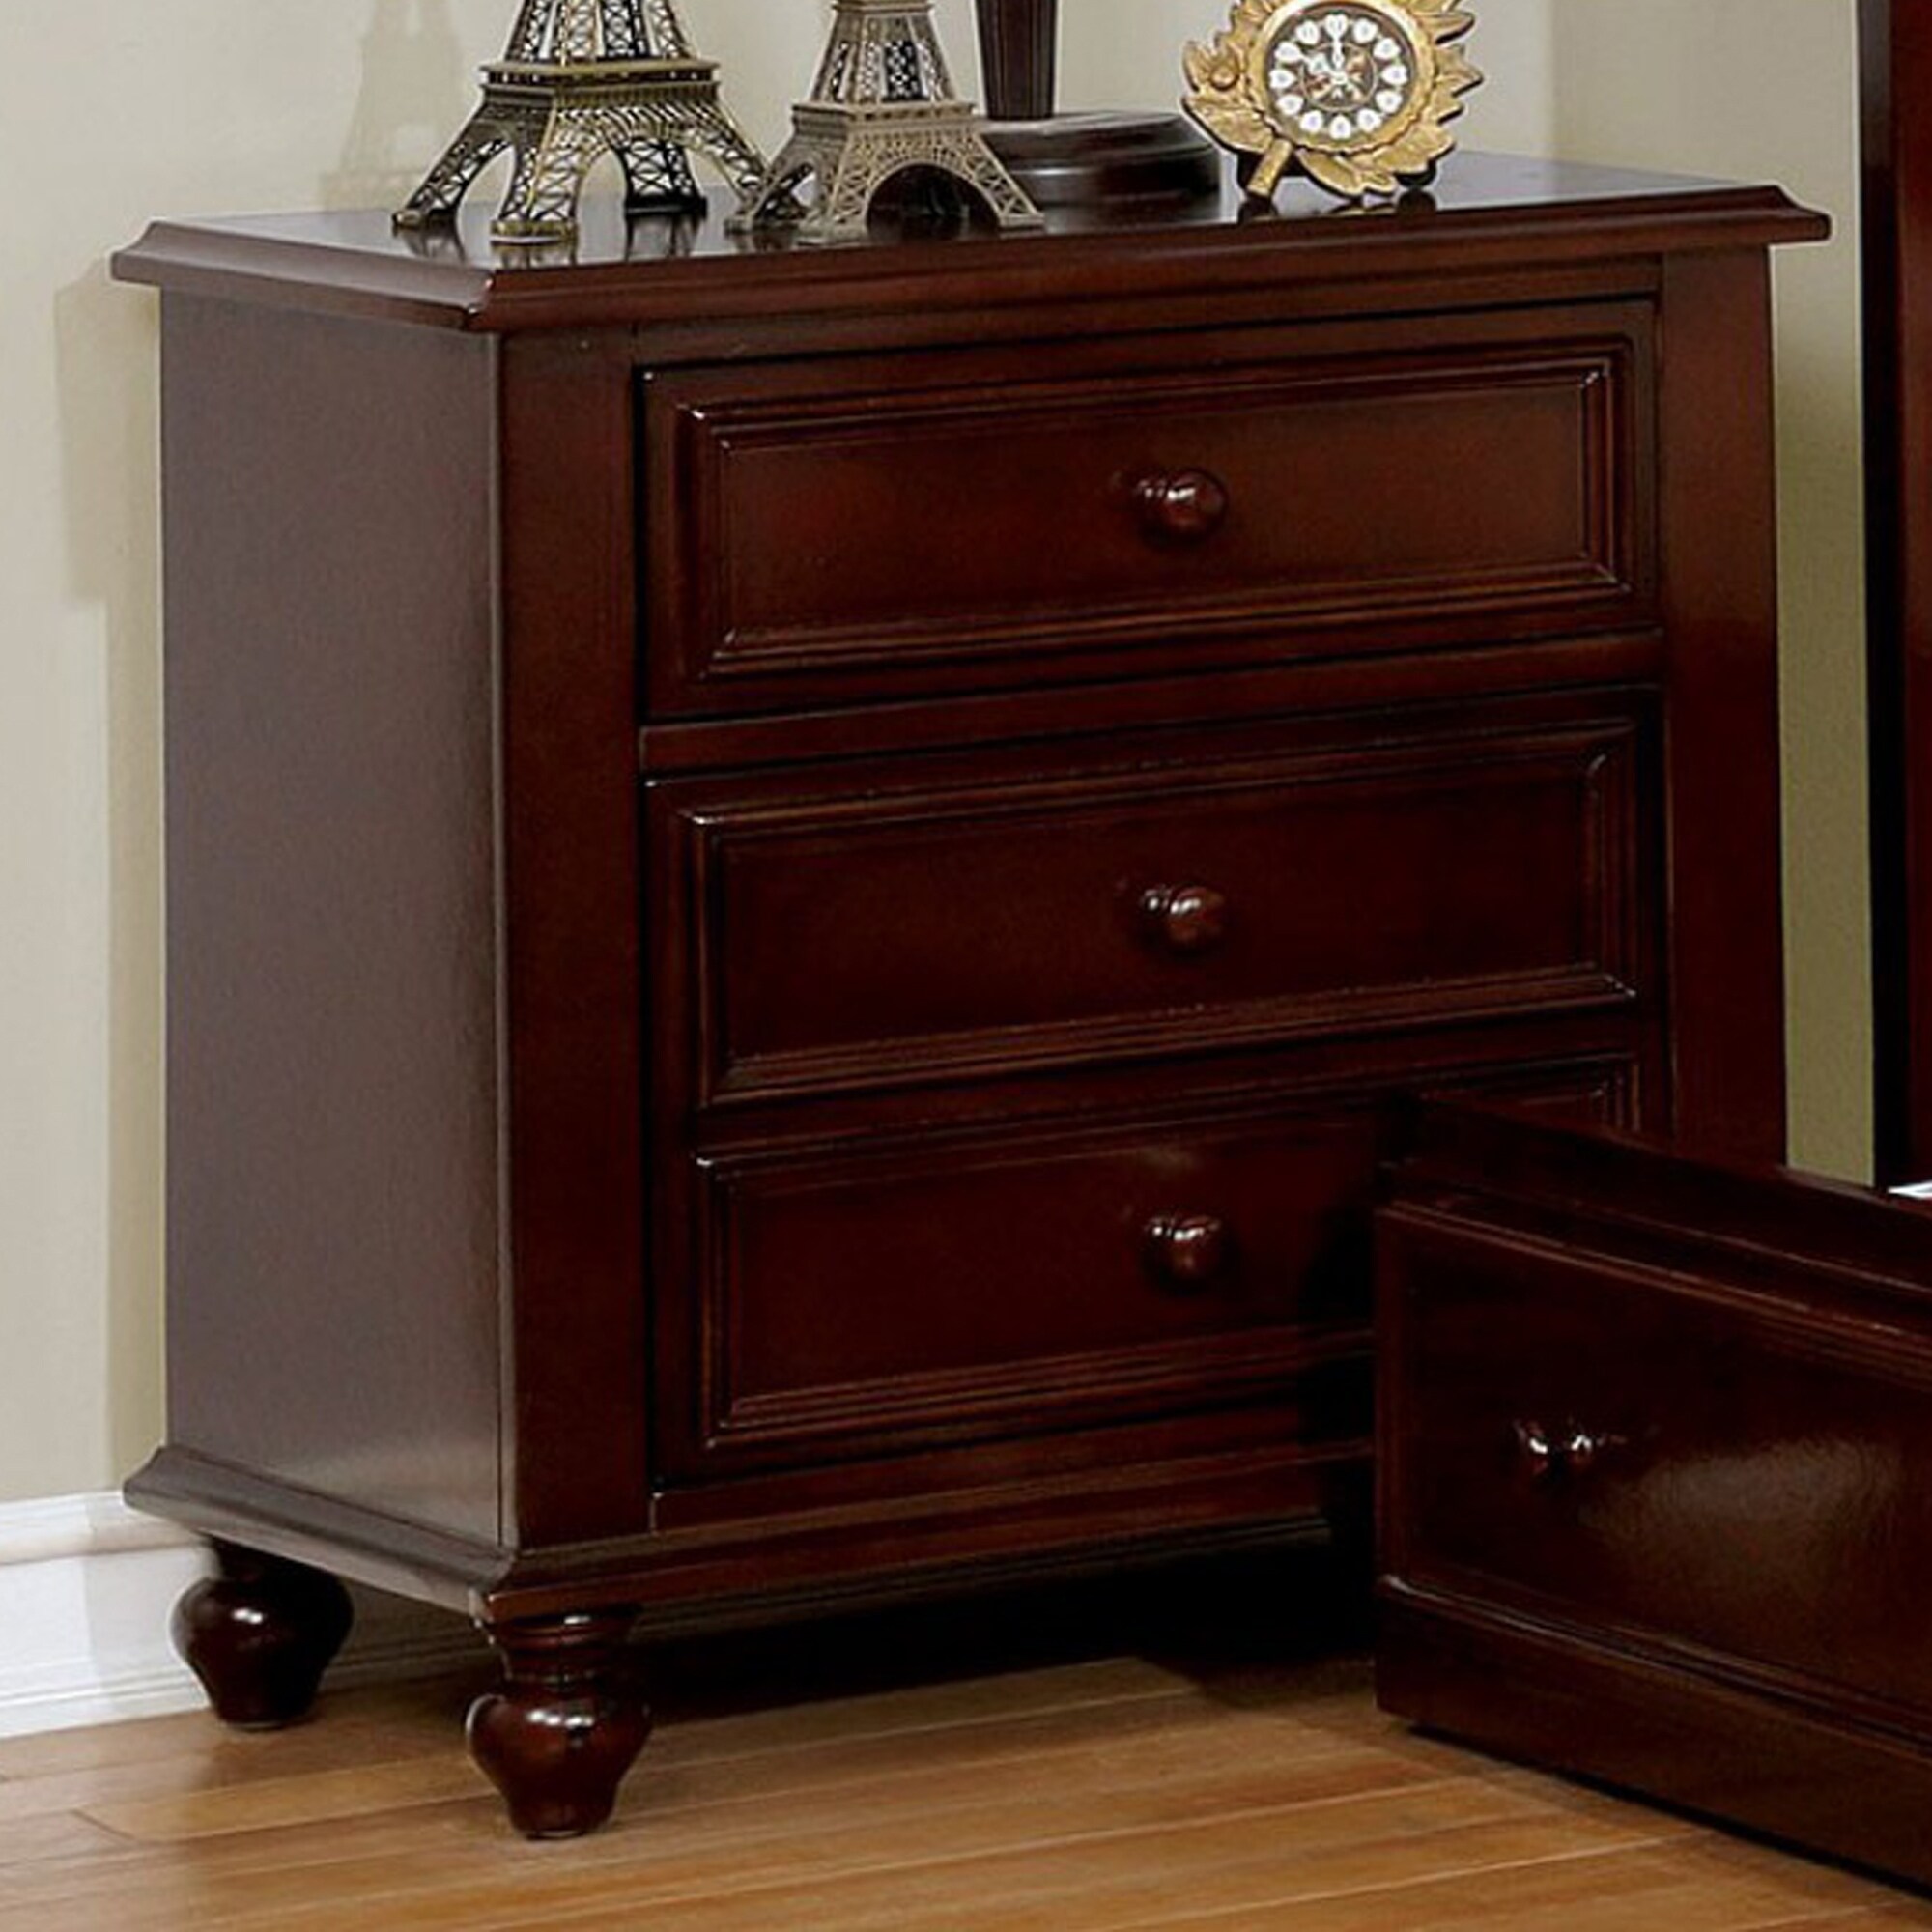 Wooden Night Stand With 2 Drawers Dark Brown On Sale Overstock 21419129